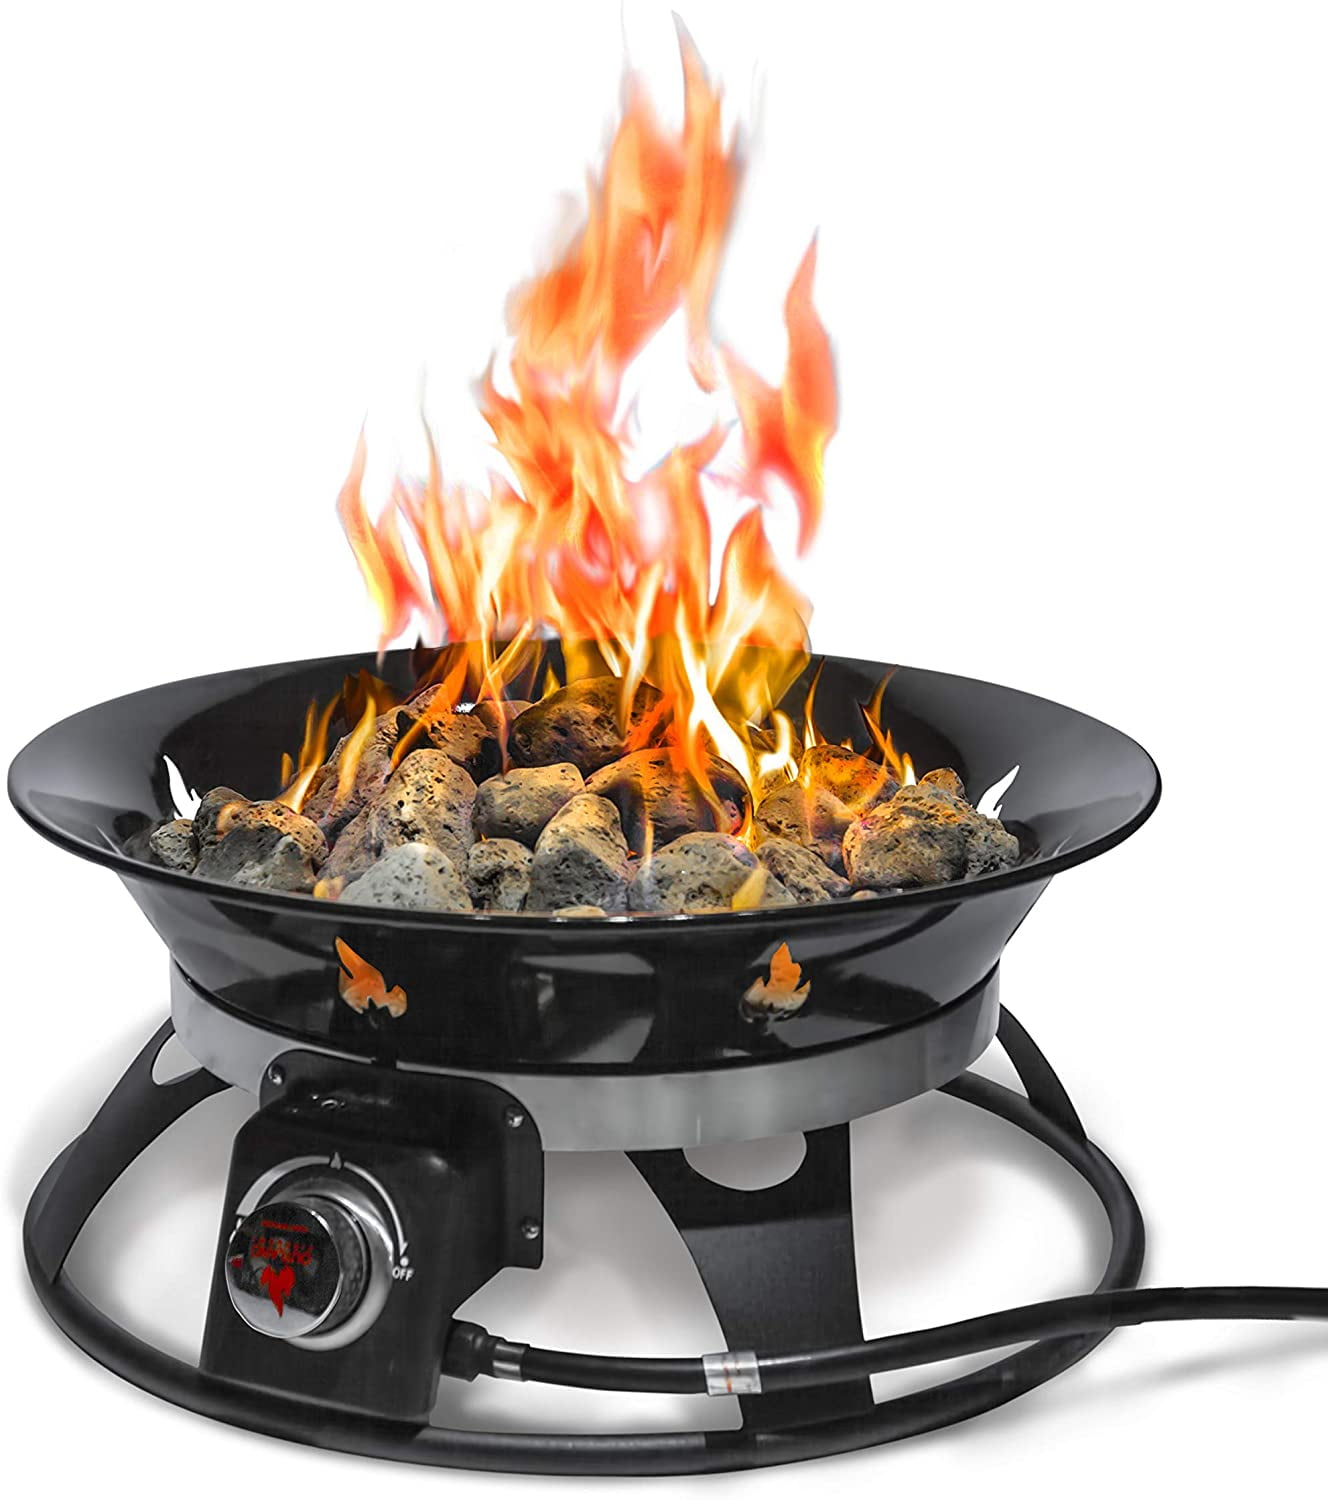 Outland Firebowl Natural Gas Conversion Kits for Specified Models of Portable Propane Fire Pits 780 NGCK for Selected Manual Igni CSA Certified for Quick & Easy Conversion 12 Foot Hose Quick Connect/Disconnect Coupling and Valve Complete 3 Piece Set